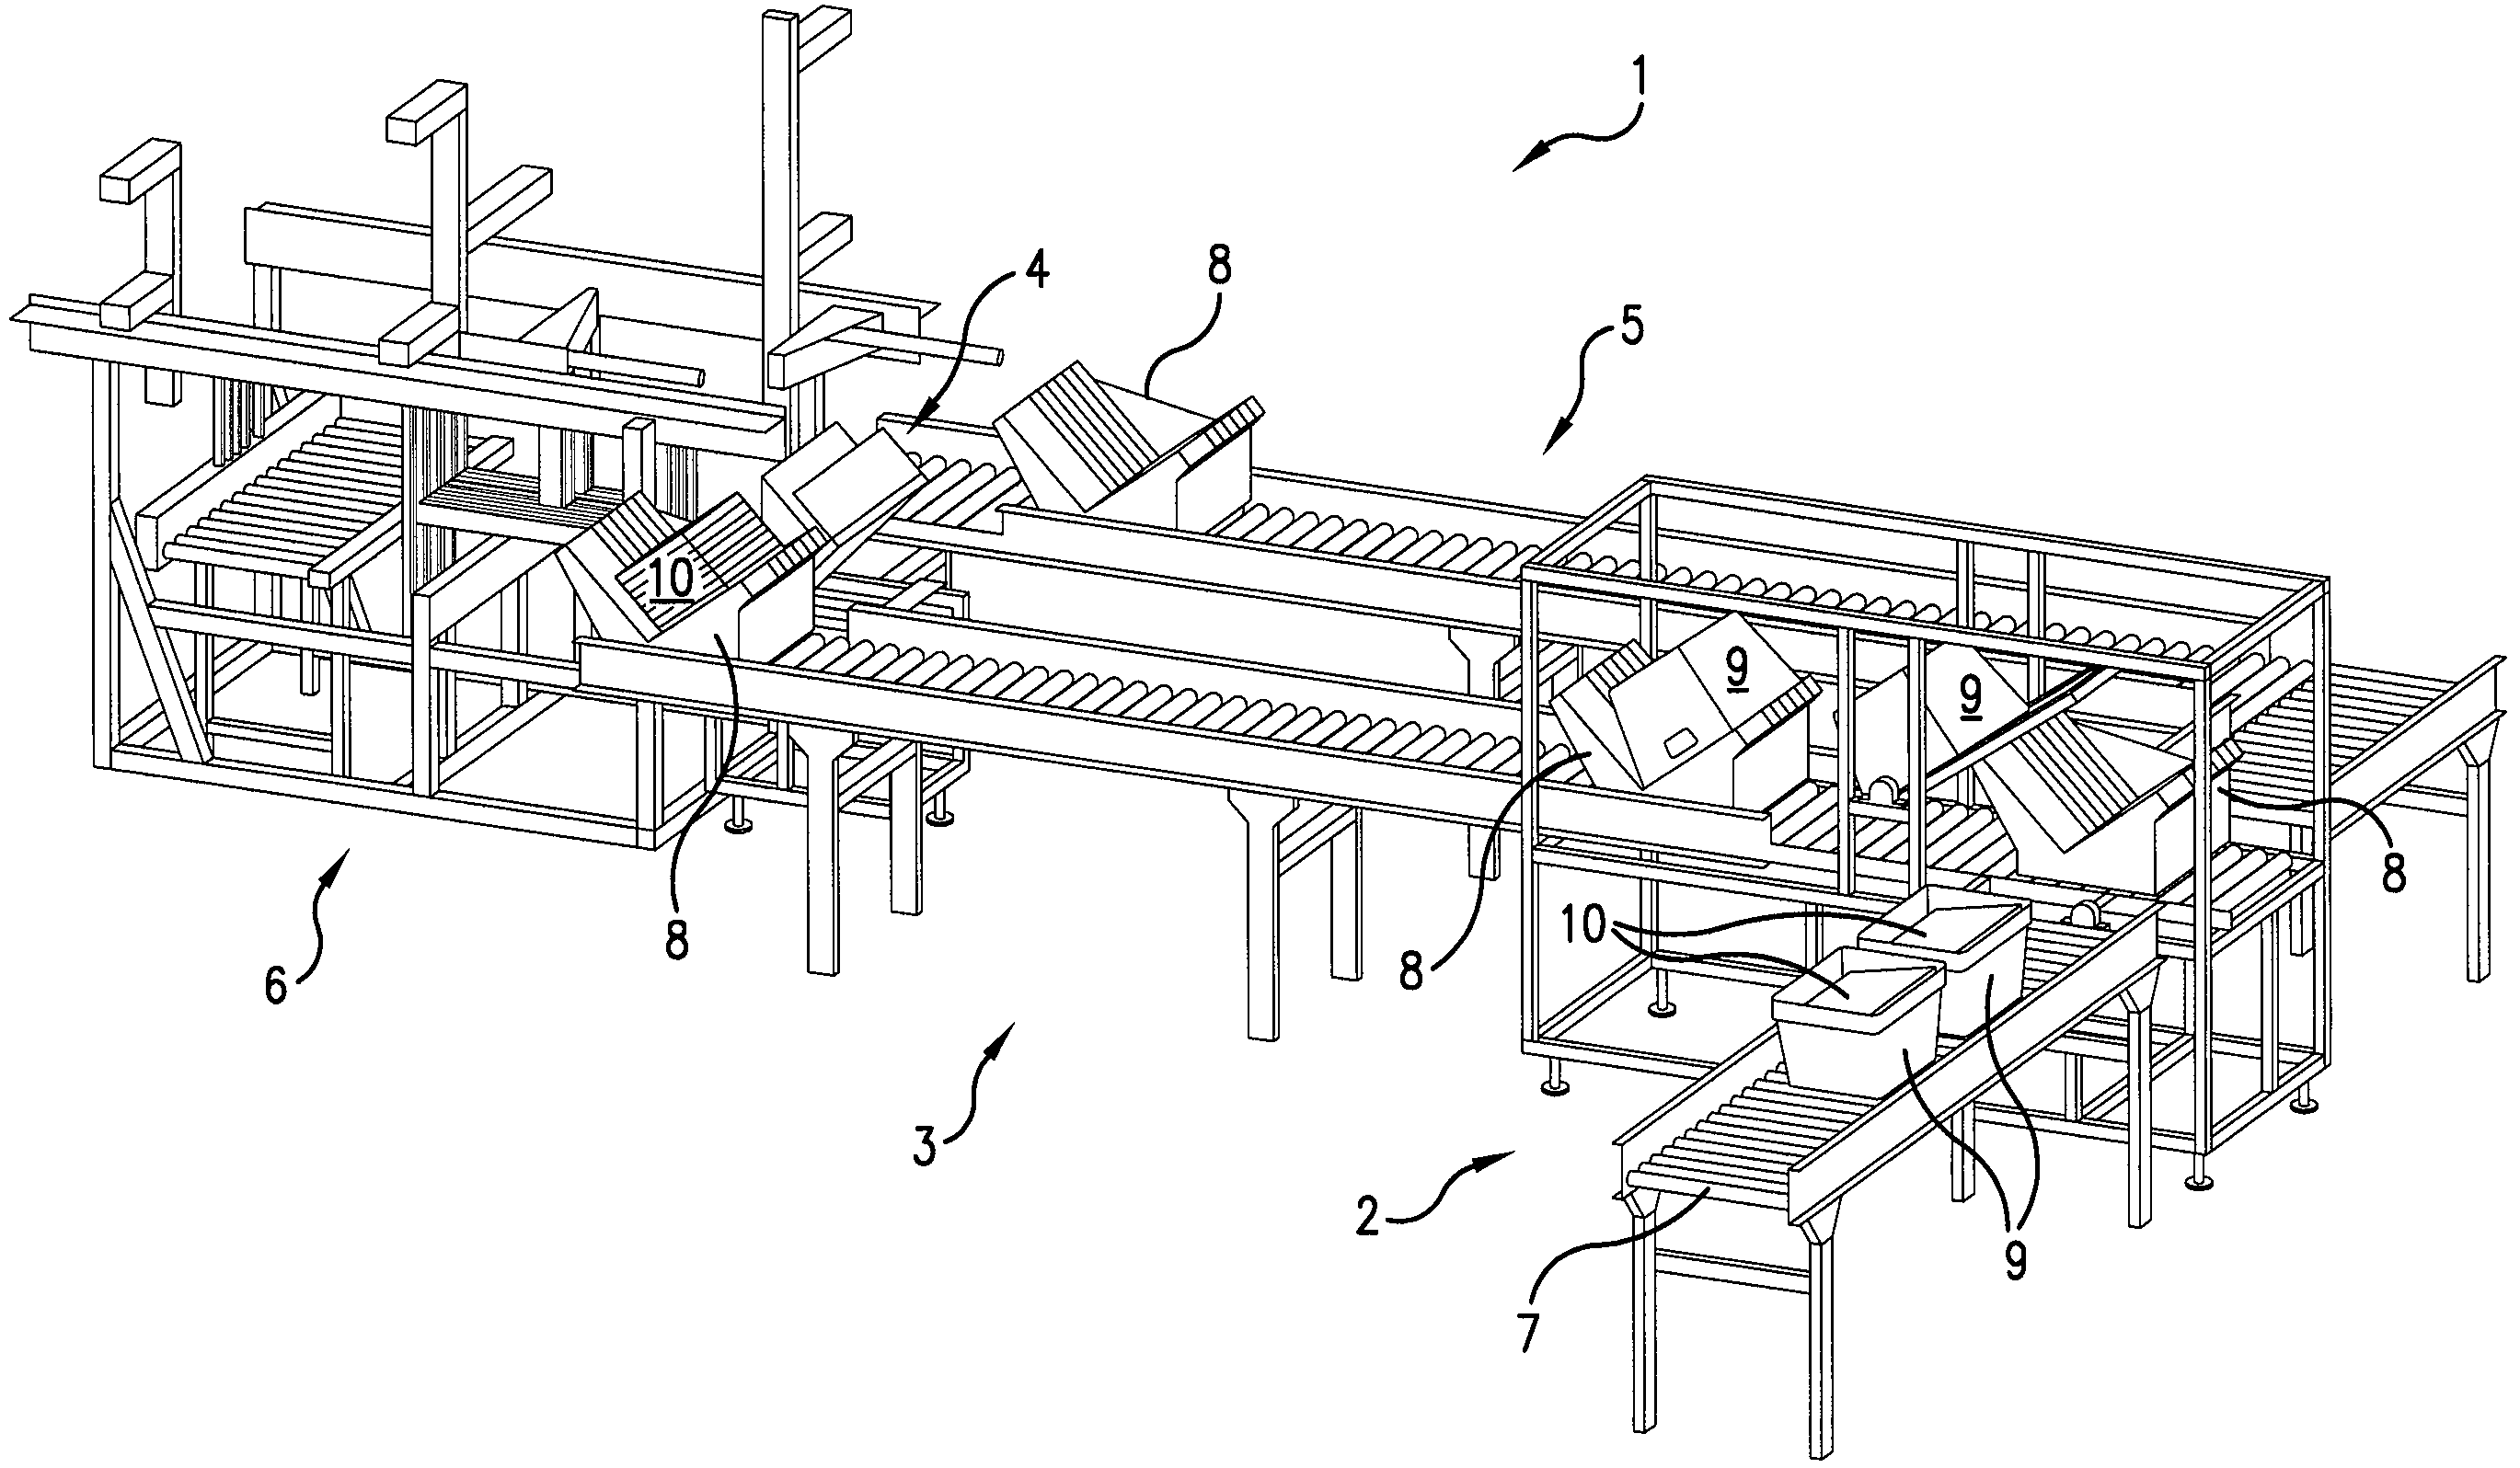 Mail tray unloader with shuttle transfer through system comprising tilting